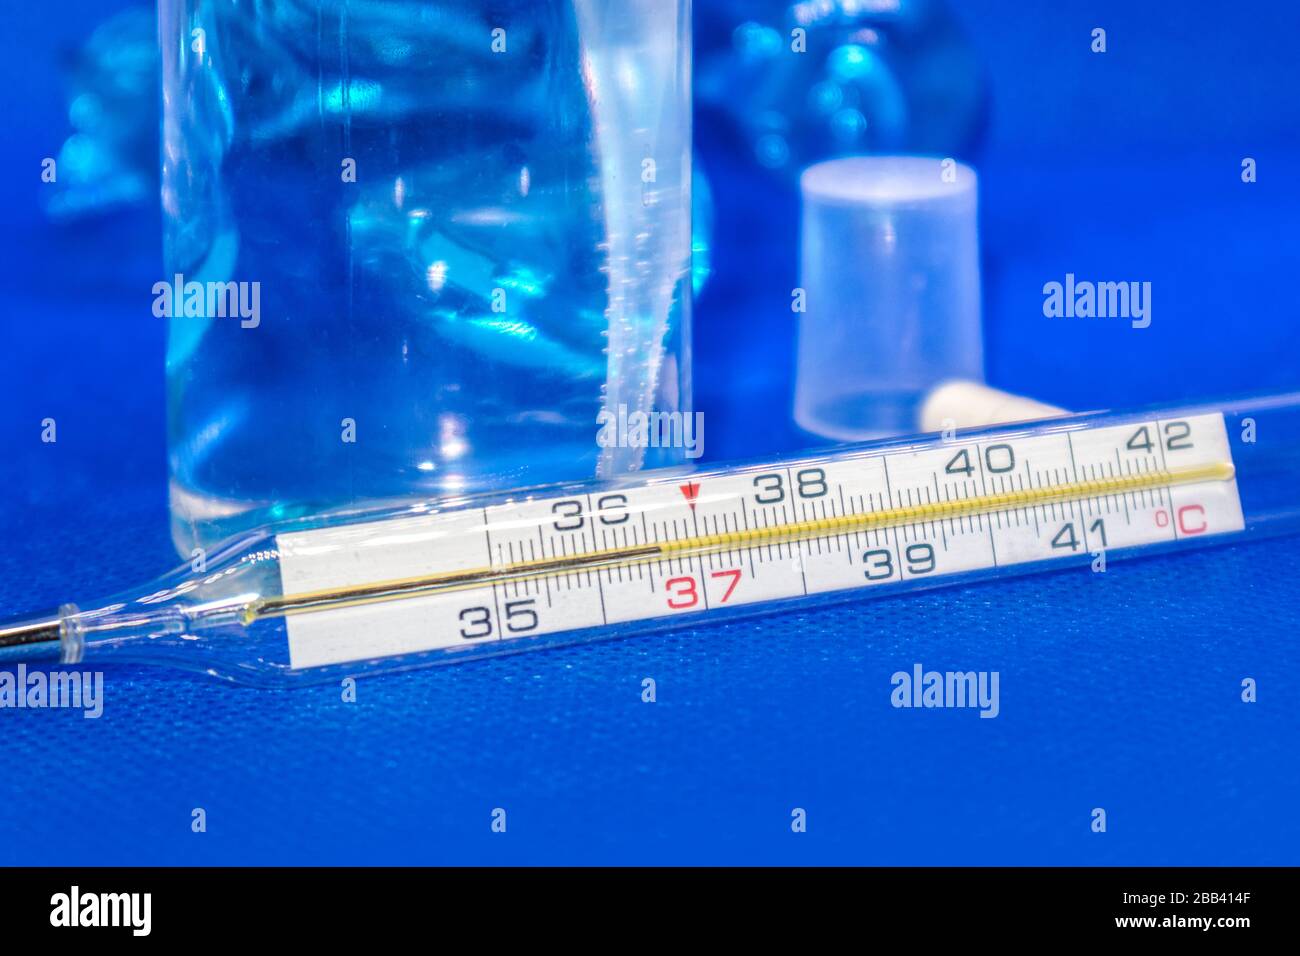 Thermometer macro, mercury instrument, measuring, indicating temperature medical equipment tool on vibrant blue background Stock Photo